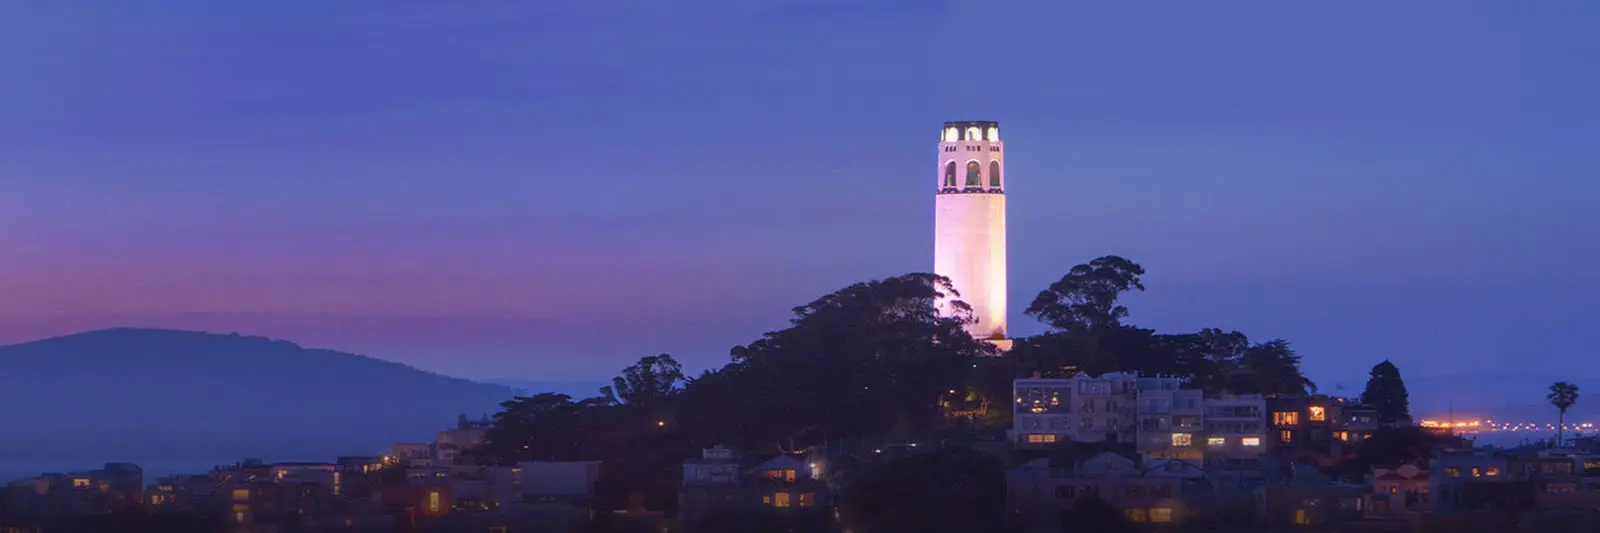 San Francisco Personal Injury Lawyers and Accident Attorneys View of Downtown San Francisco, California and Coit Tower at Night